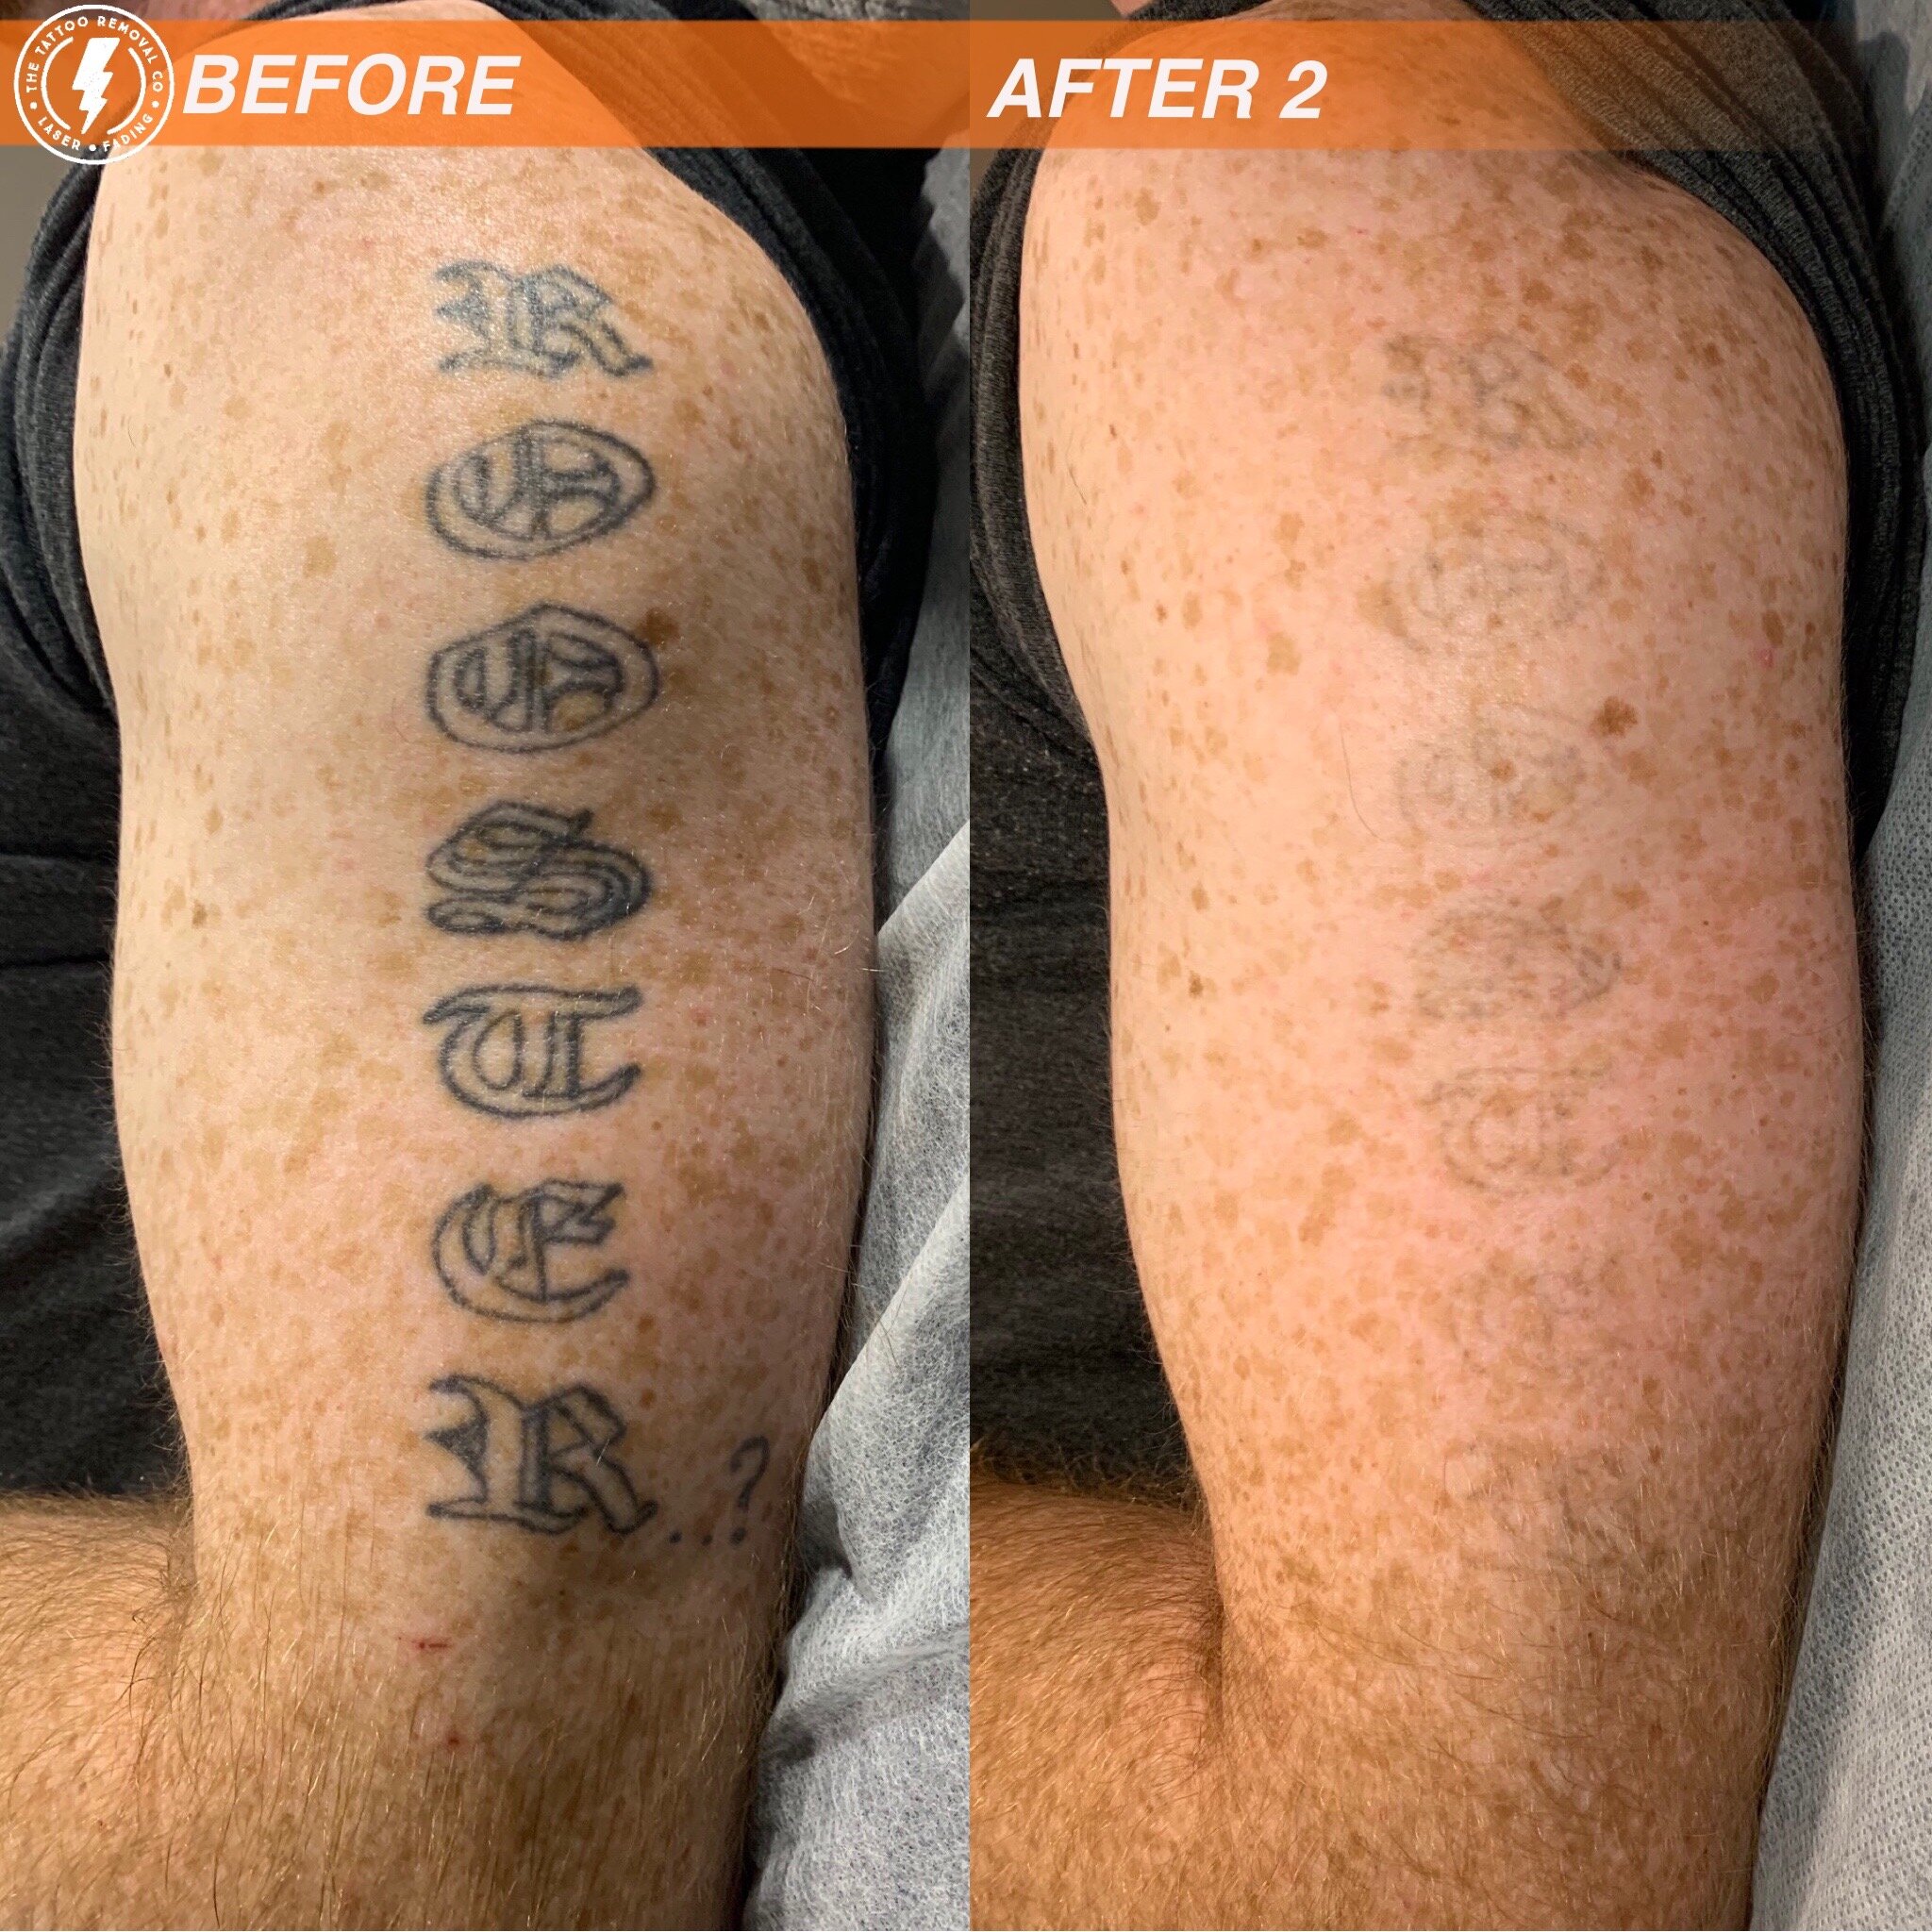 The Tattoo Removal  Tattoo Removal Adelaide